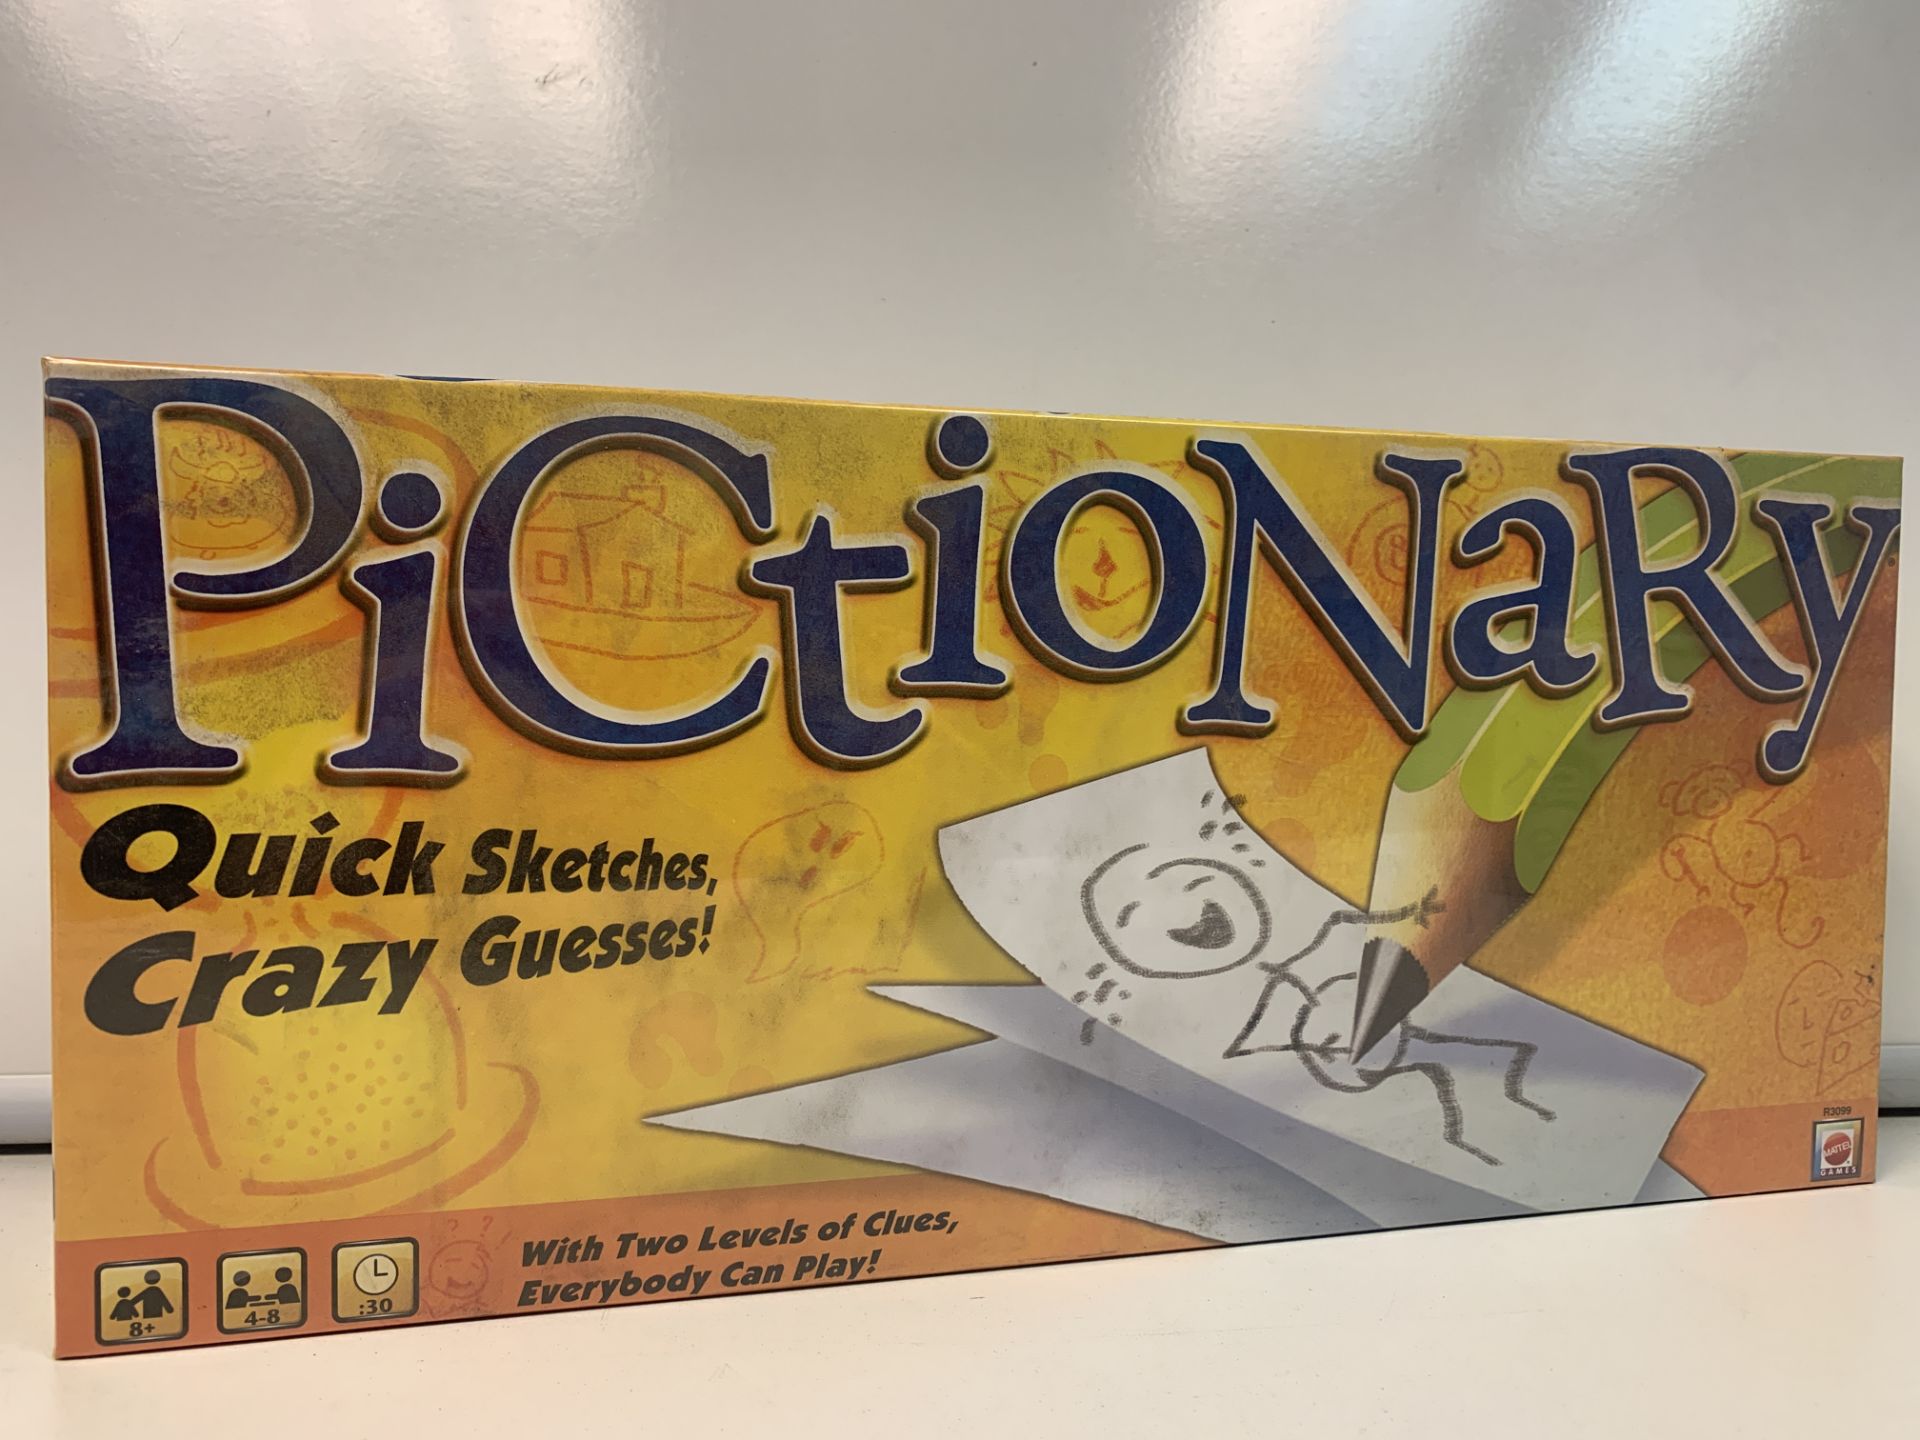 5 X BRAND NEW PICTIONARY CLASSIC BOARD GAMES (PCK)